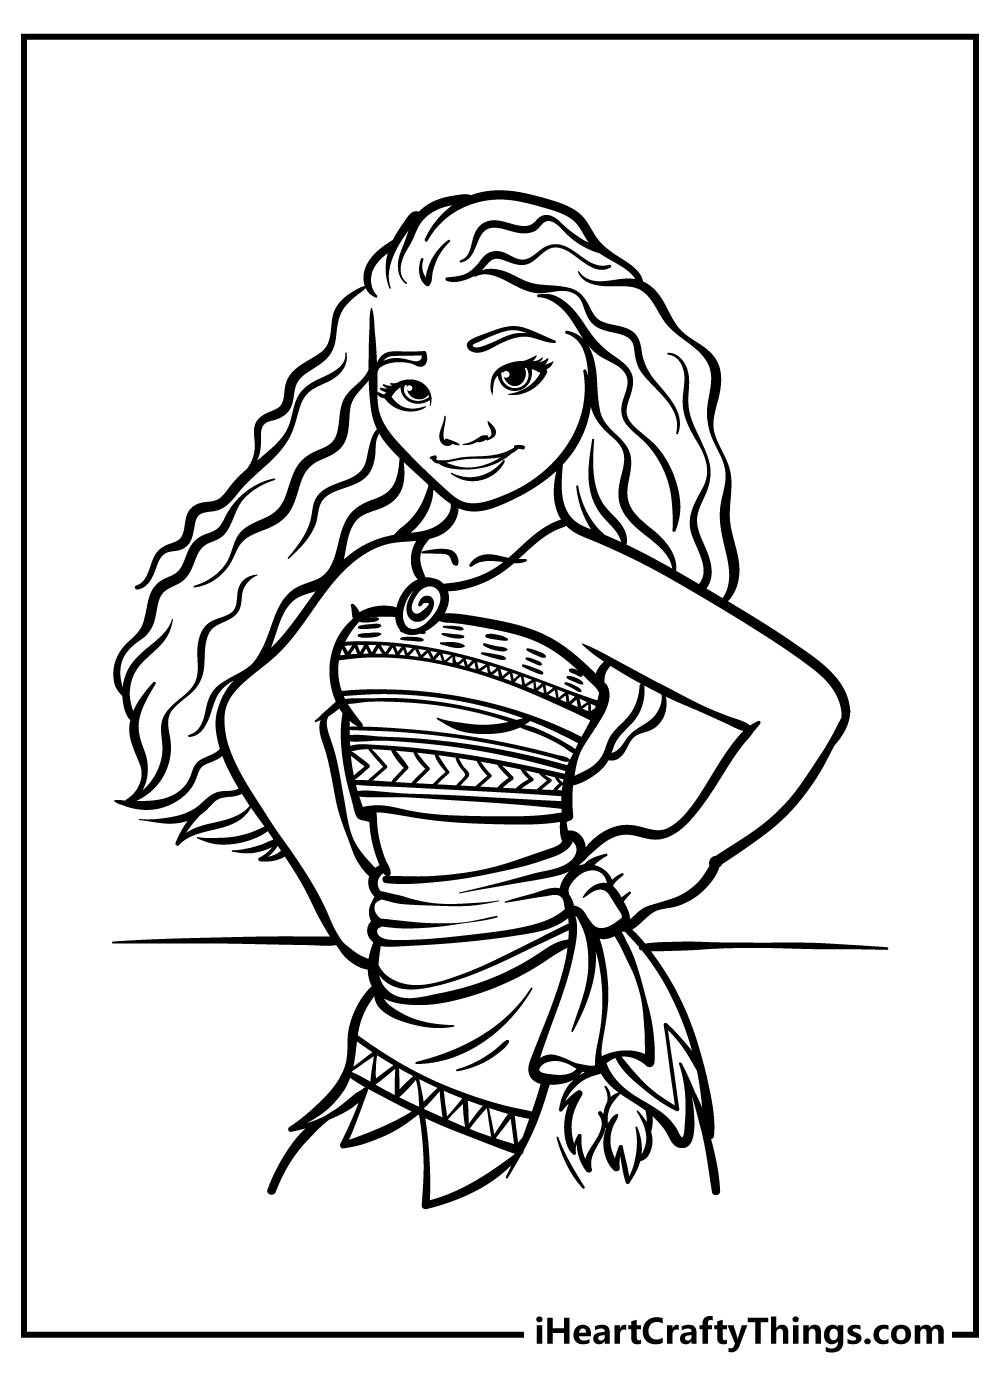 Moana coloring pages free printables